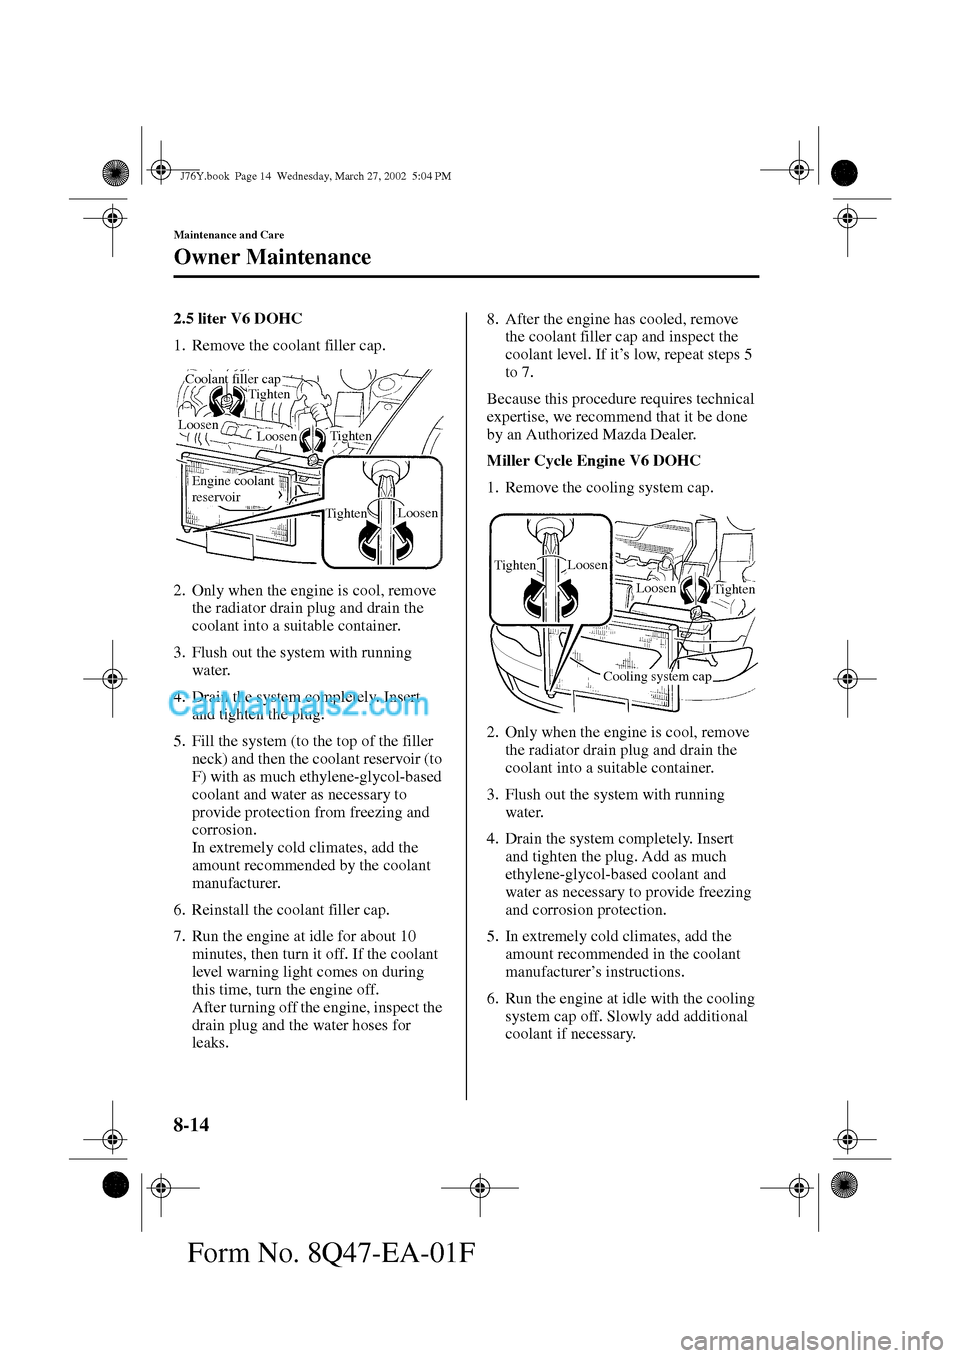 MAZDA MODEL MILLENIA 2002  Owners Manual (in English) 8-14
Maintenance and Care
Owner Maintenance
Form No. 8Q47-EA-01F
2.5 liter V6 DOHC
1. Remove the coolant filler cap.
2. Only when the engine is cool, remove 
the radiator drain plug and drain the 
coo